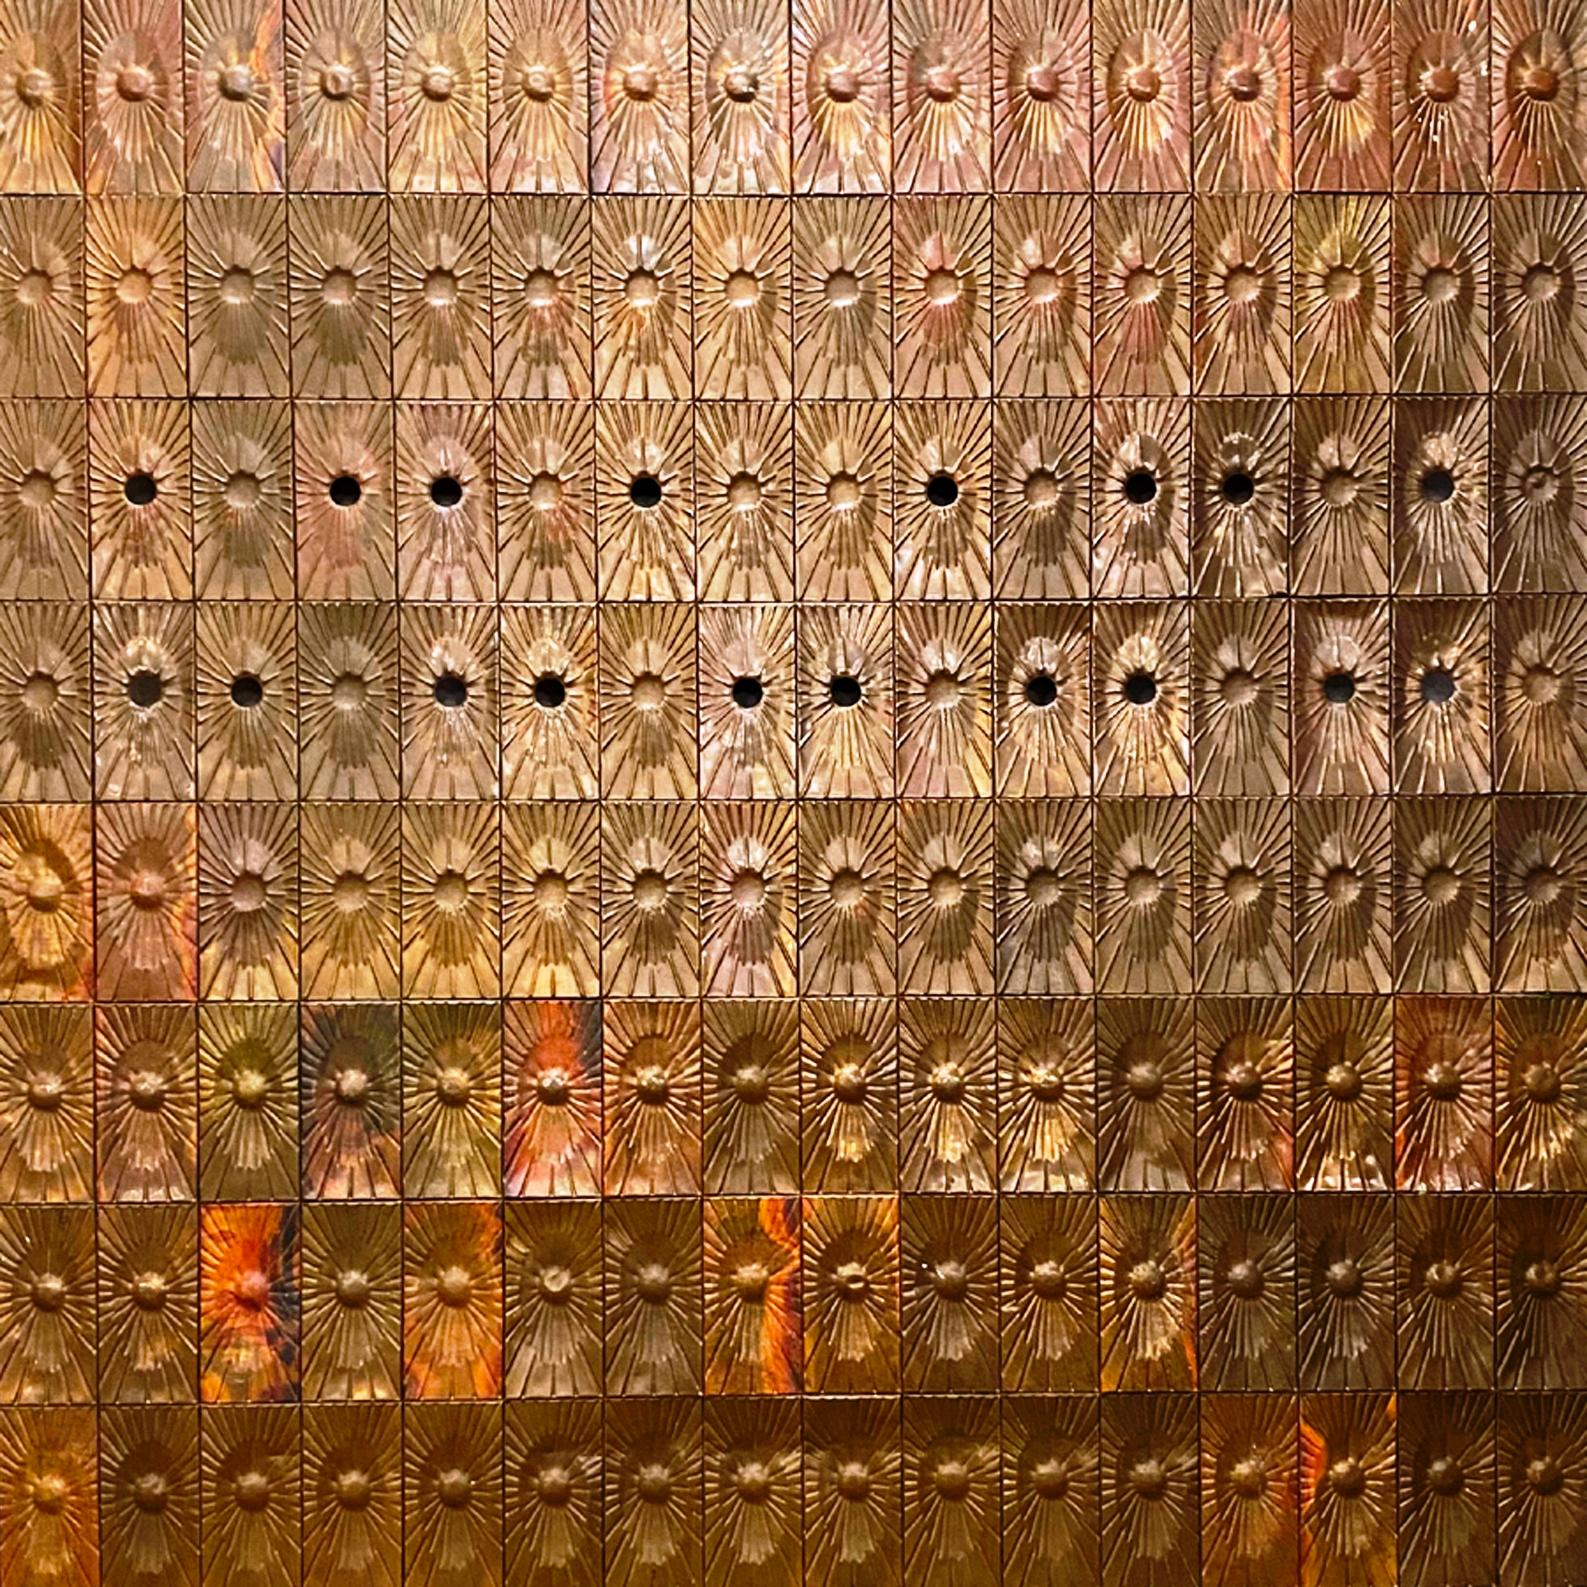 Mid-Century Modern Copper Wall Panelling Cladding by Edit Oborzil, 1971 Art Object Panel